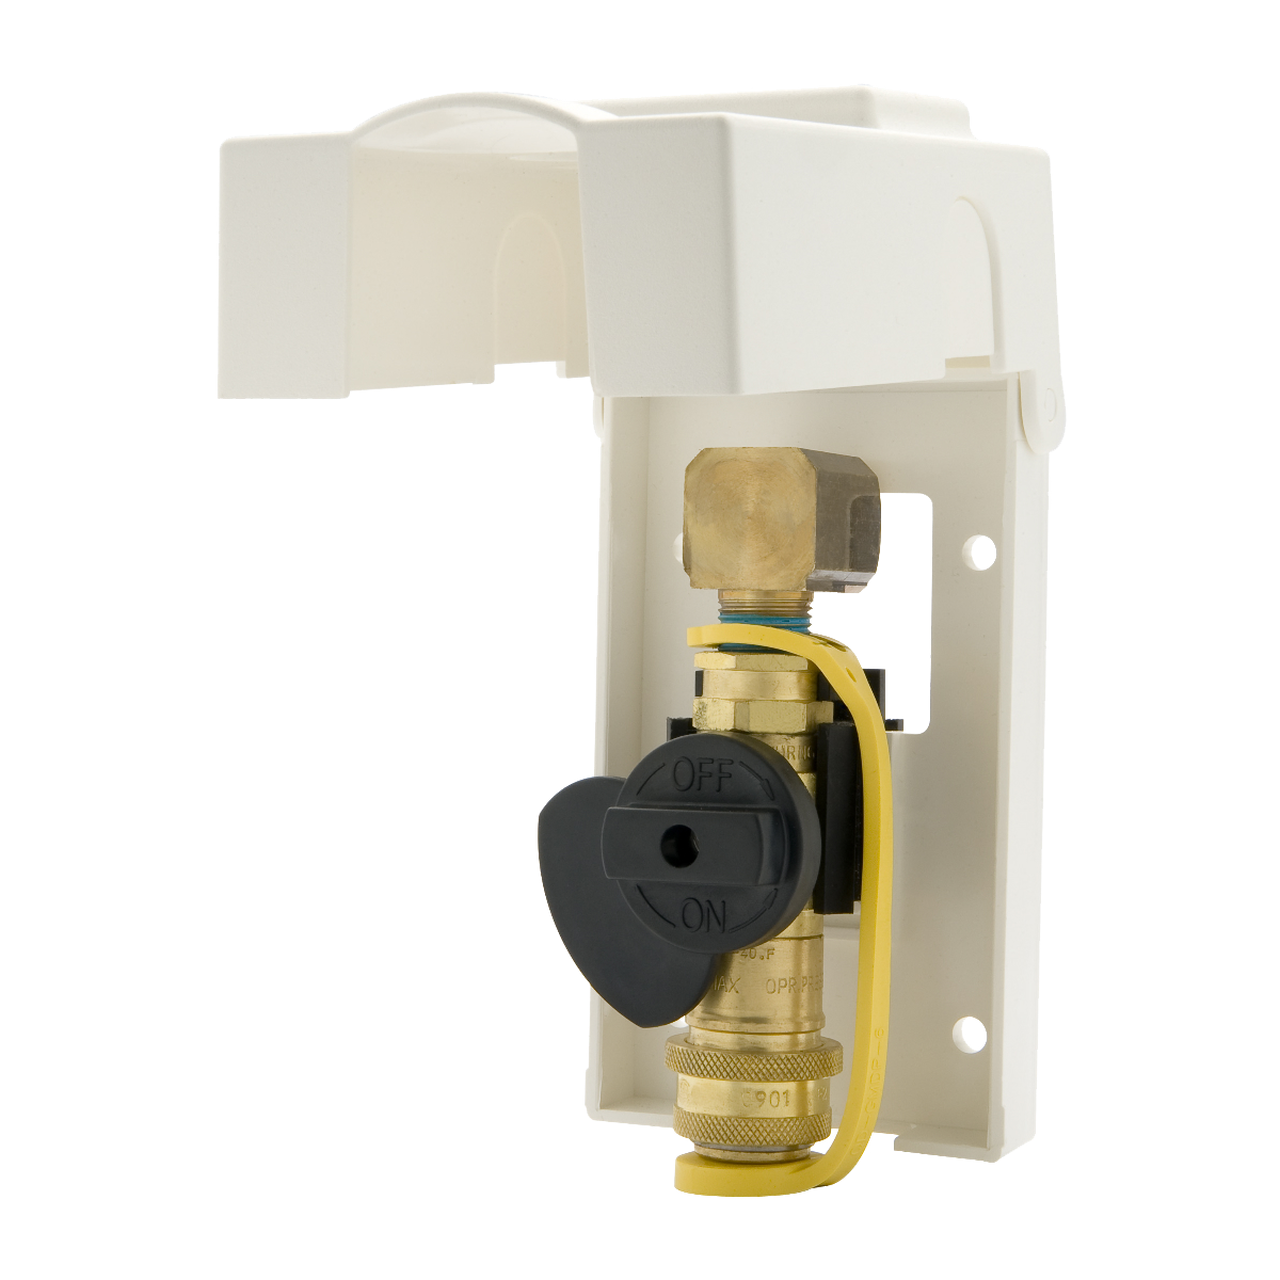 Leidingen Neem de telefoon op ideologie www.PWMall.com. PWMall-NGO-2-Gas-Flo 3/8" Natural Gas / Propane Gas Outlet  with White ABS Housing